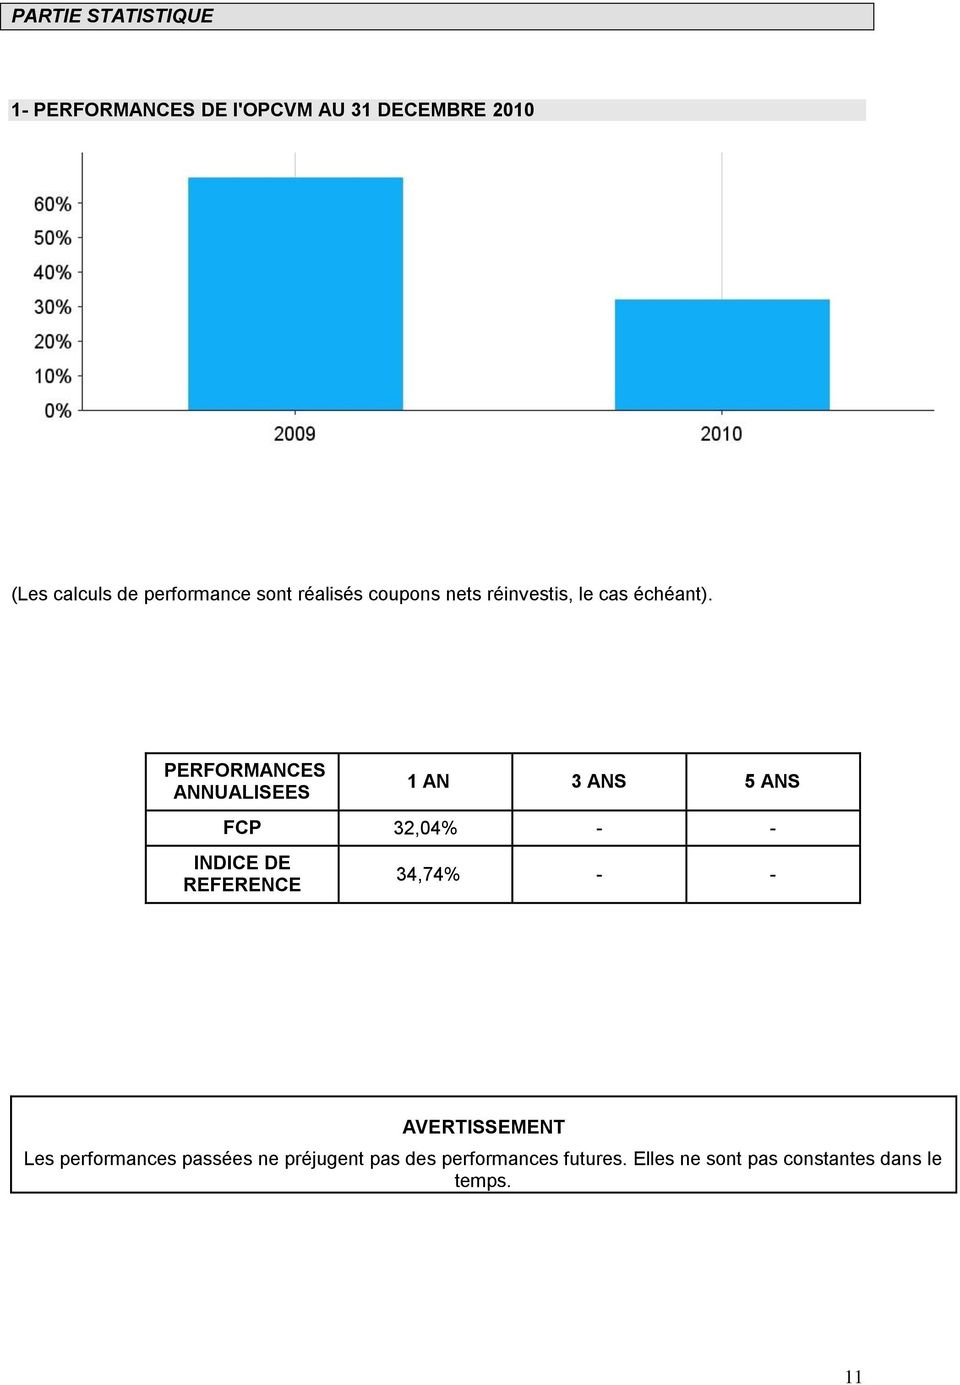 PERFORMANCES ANNUALISEES 1 AN 3 ANS 5 ANS FCP 32,04% - - INDICE DE REFERENCE 34,74% - -